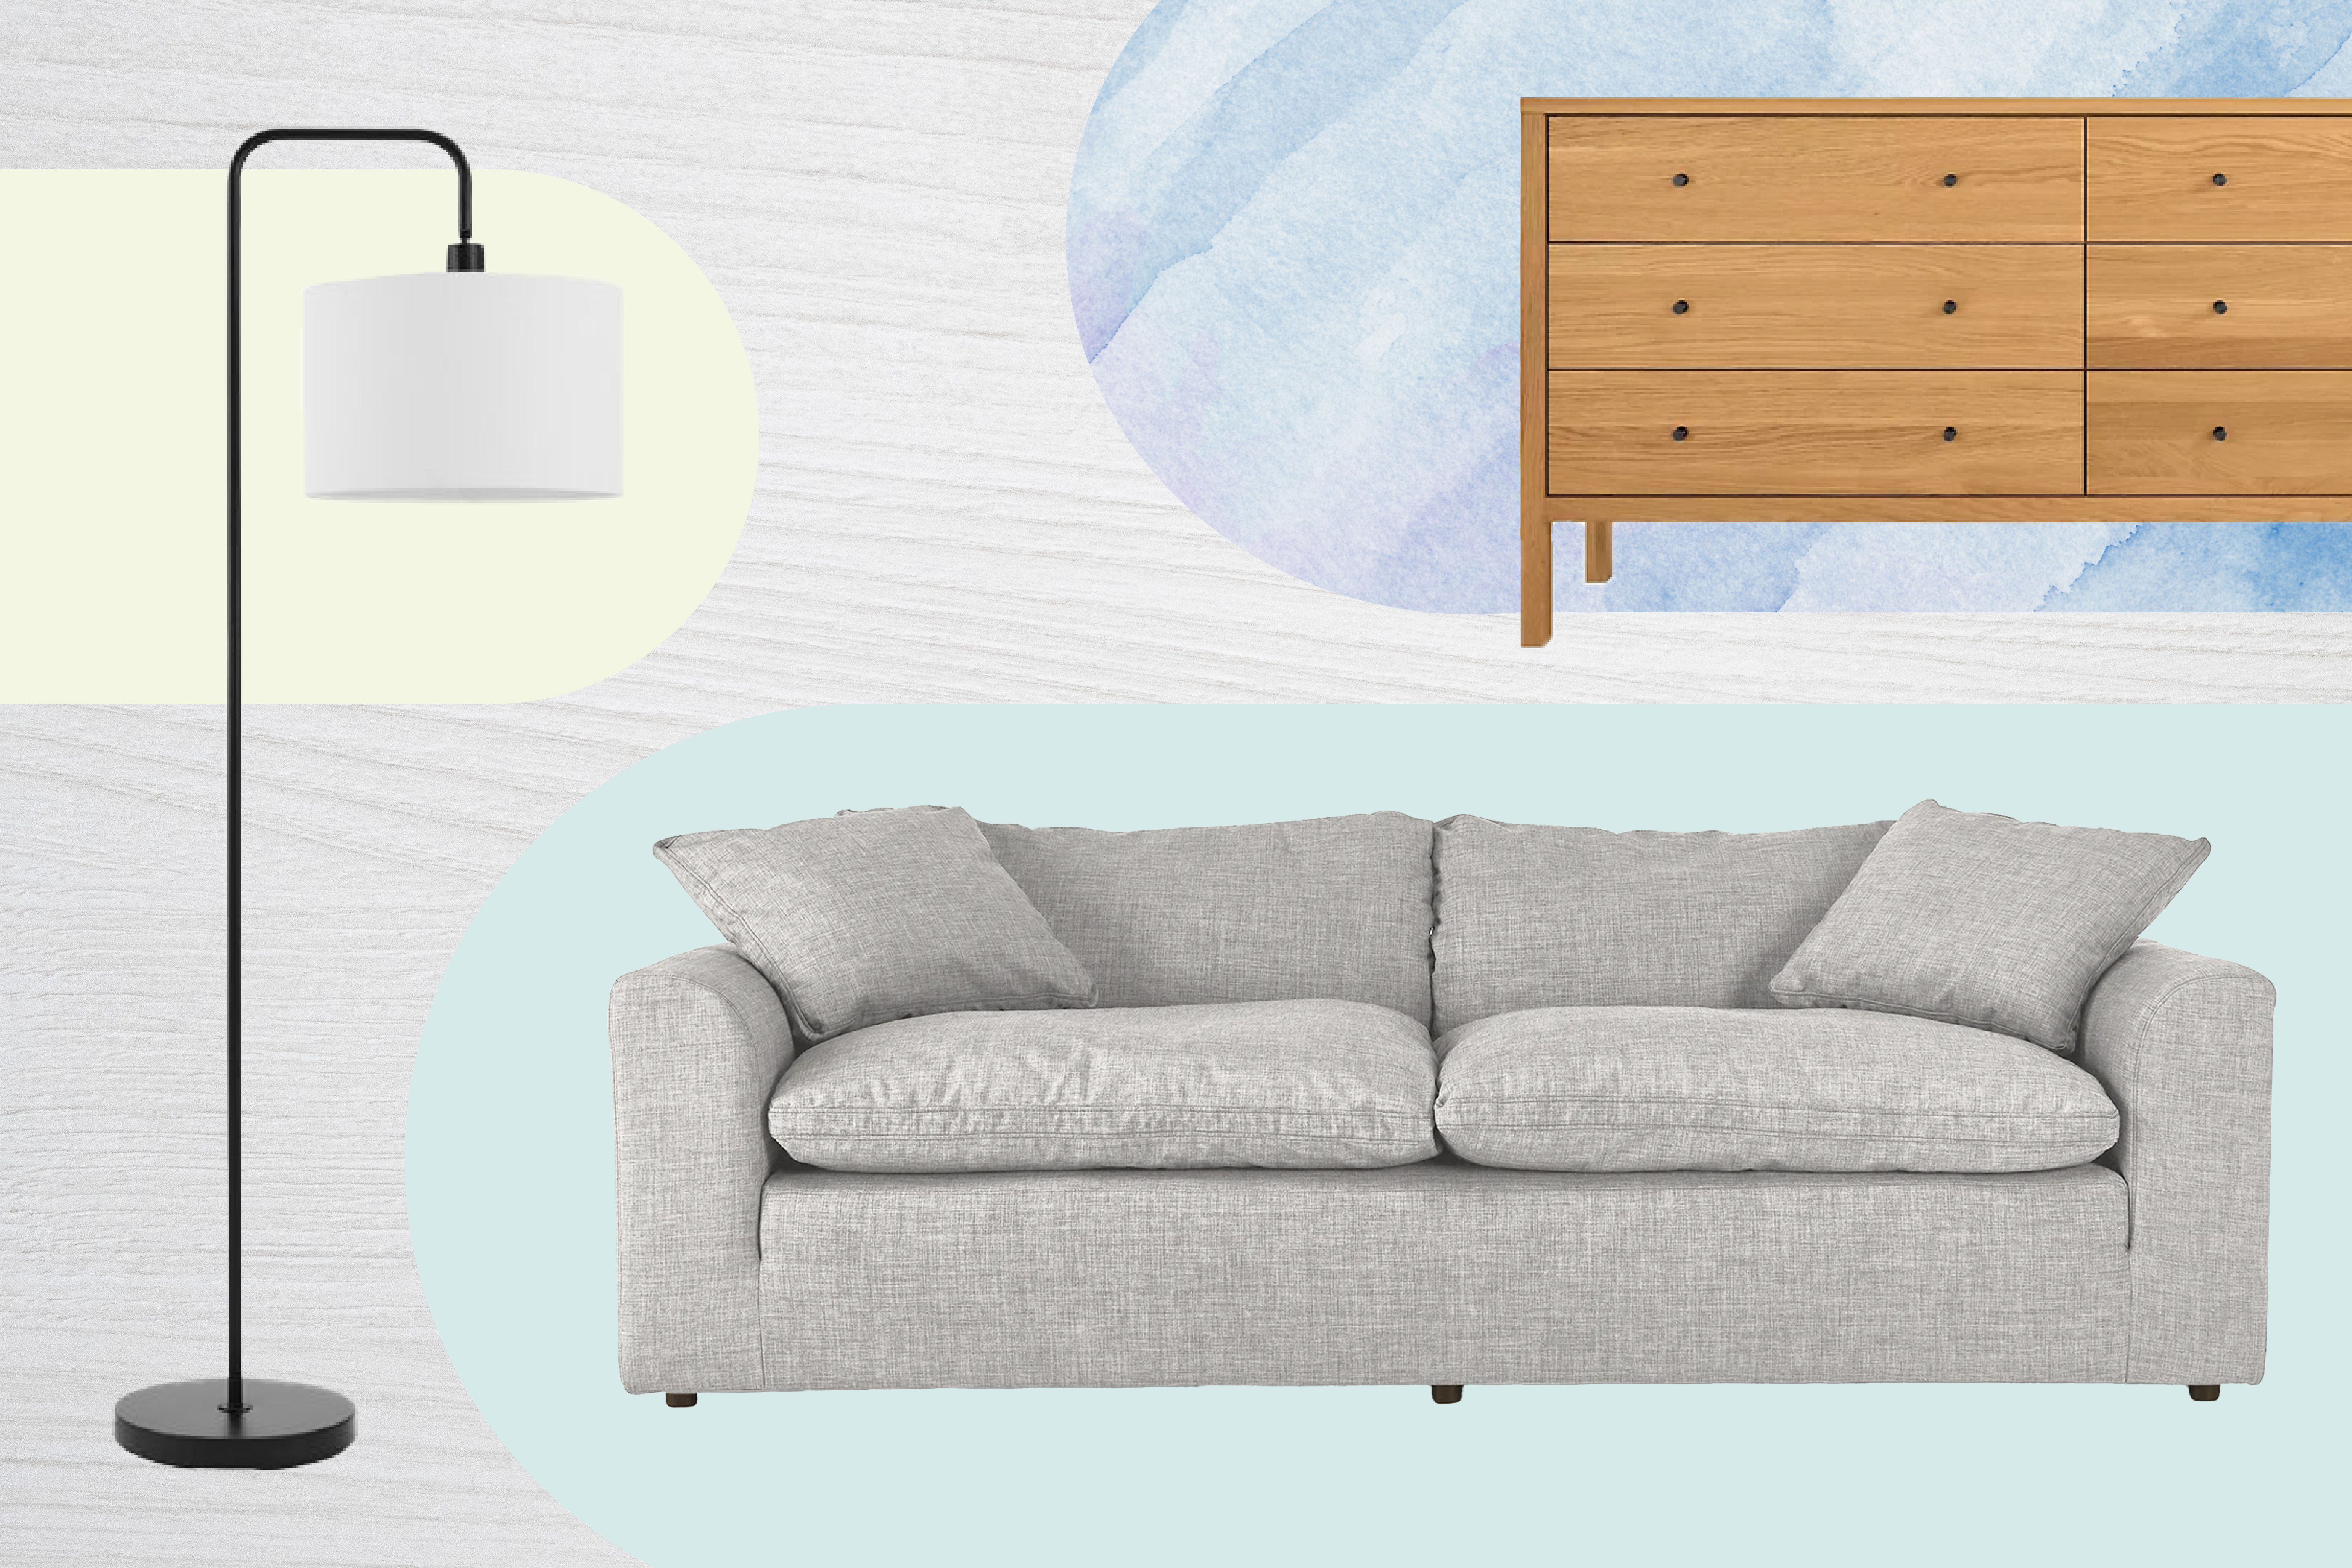 The Best Furniture Deals to Score This Month